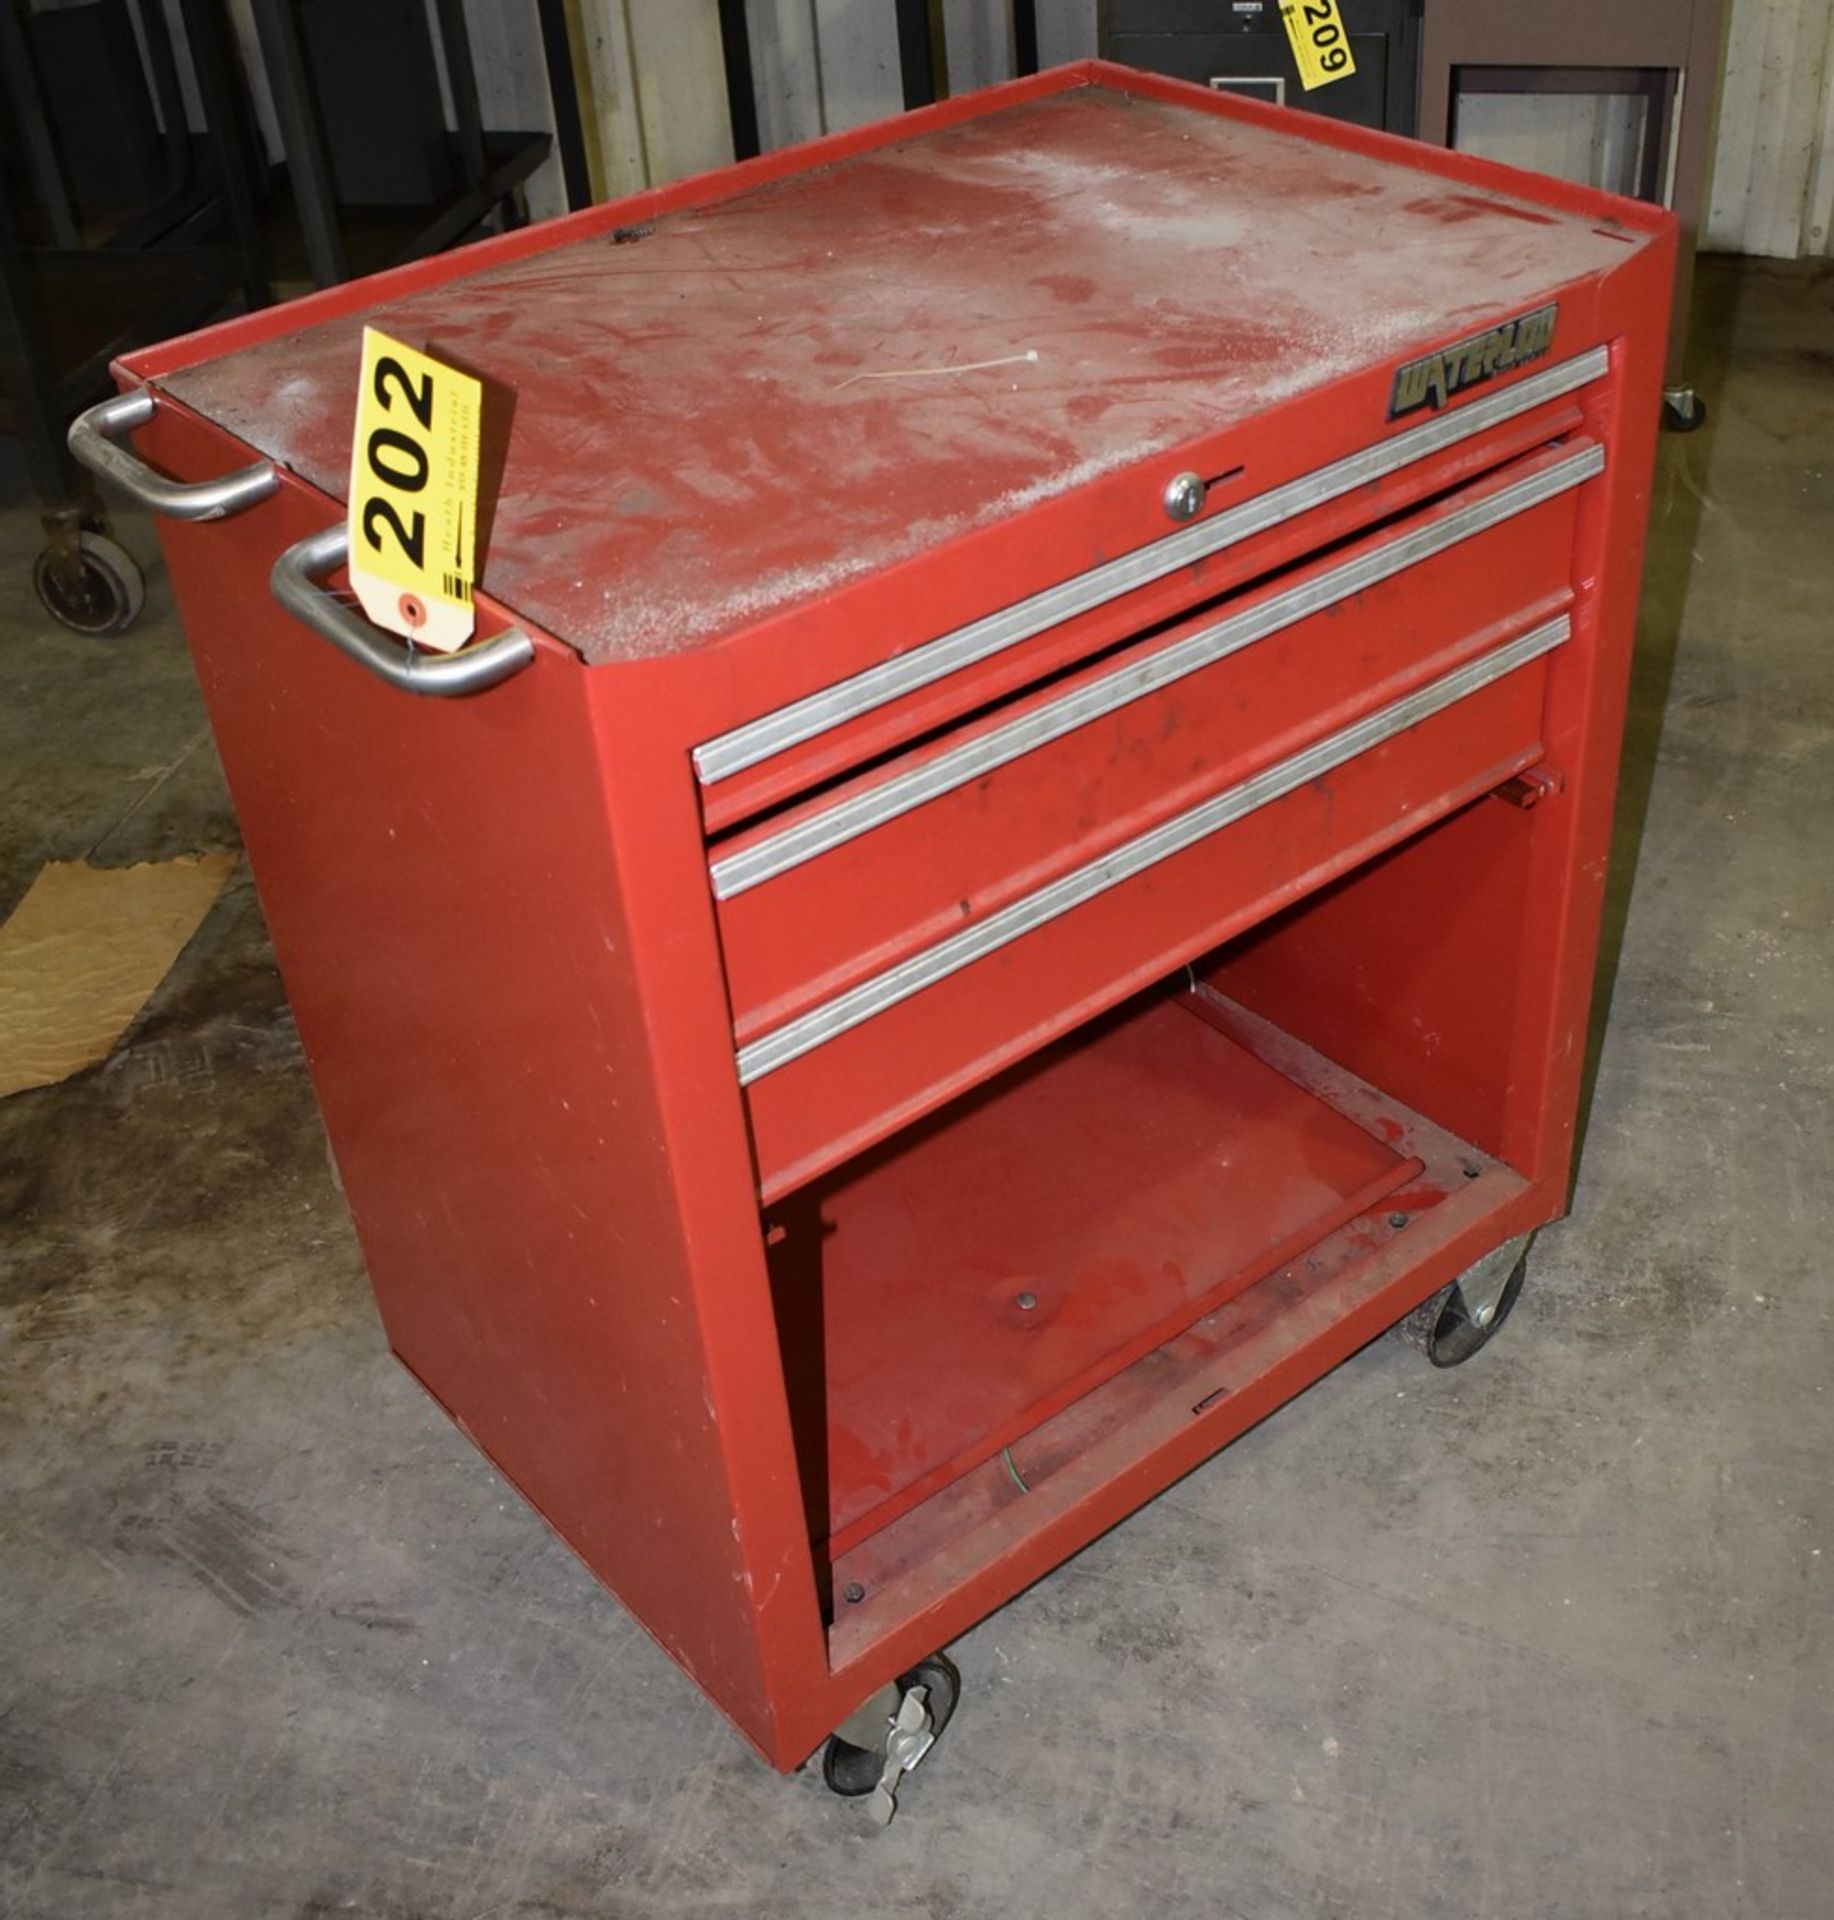 Master Lod Shop Services Portable Three Drawer Tool Storage Cabinet - Image 3 of 3